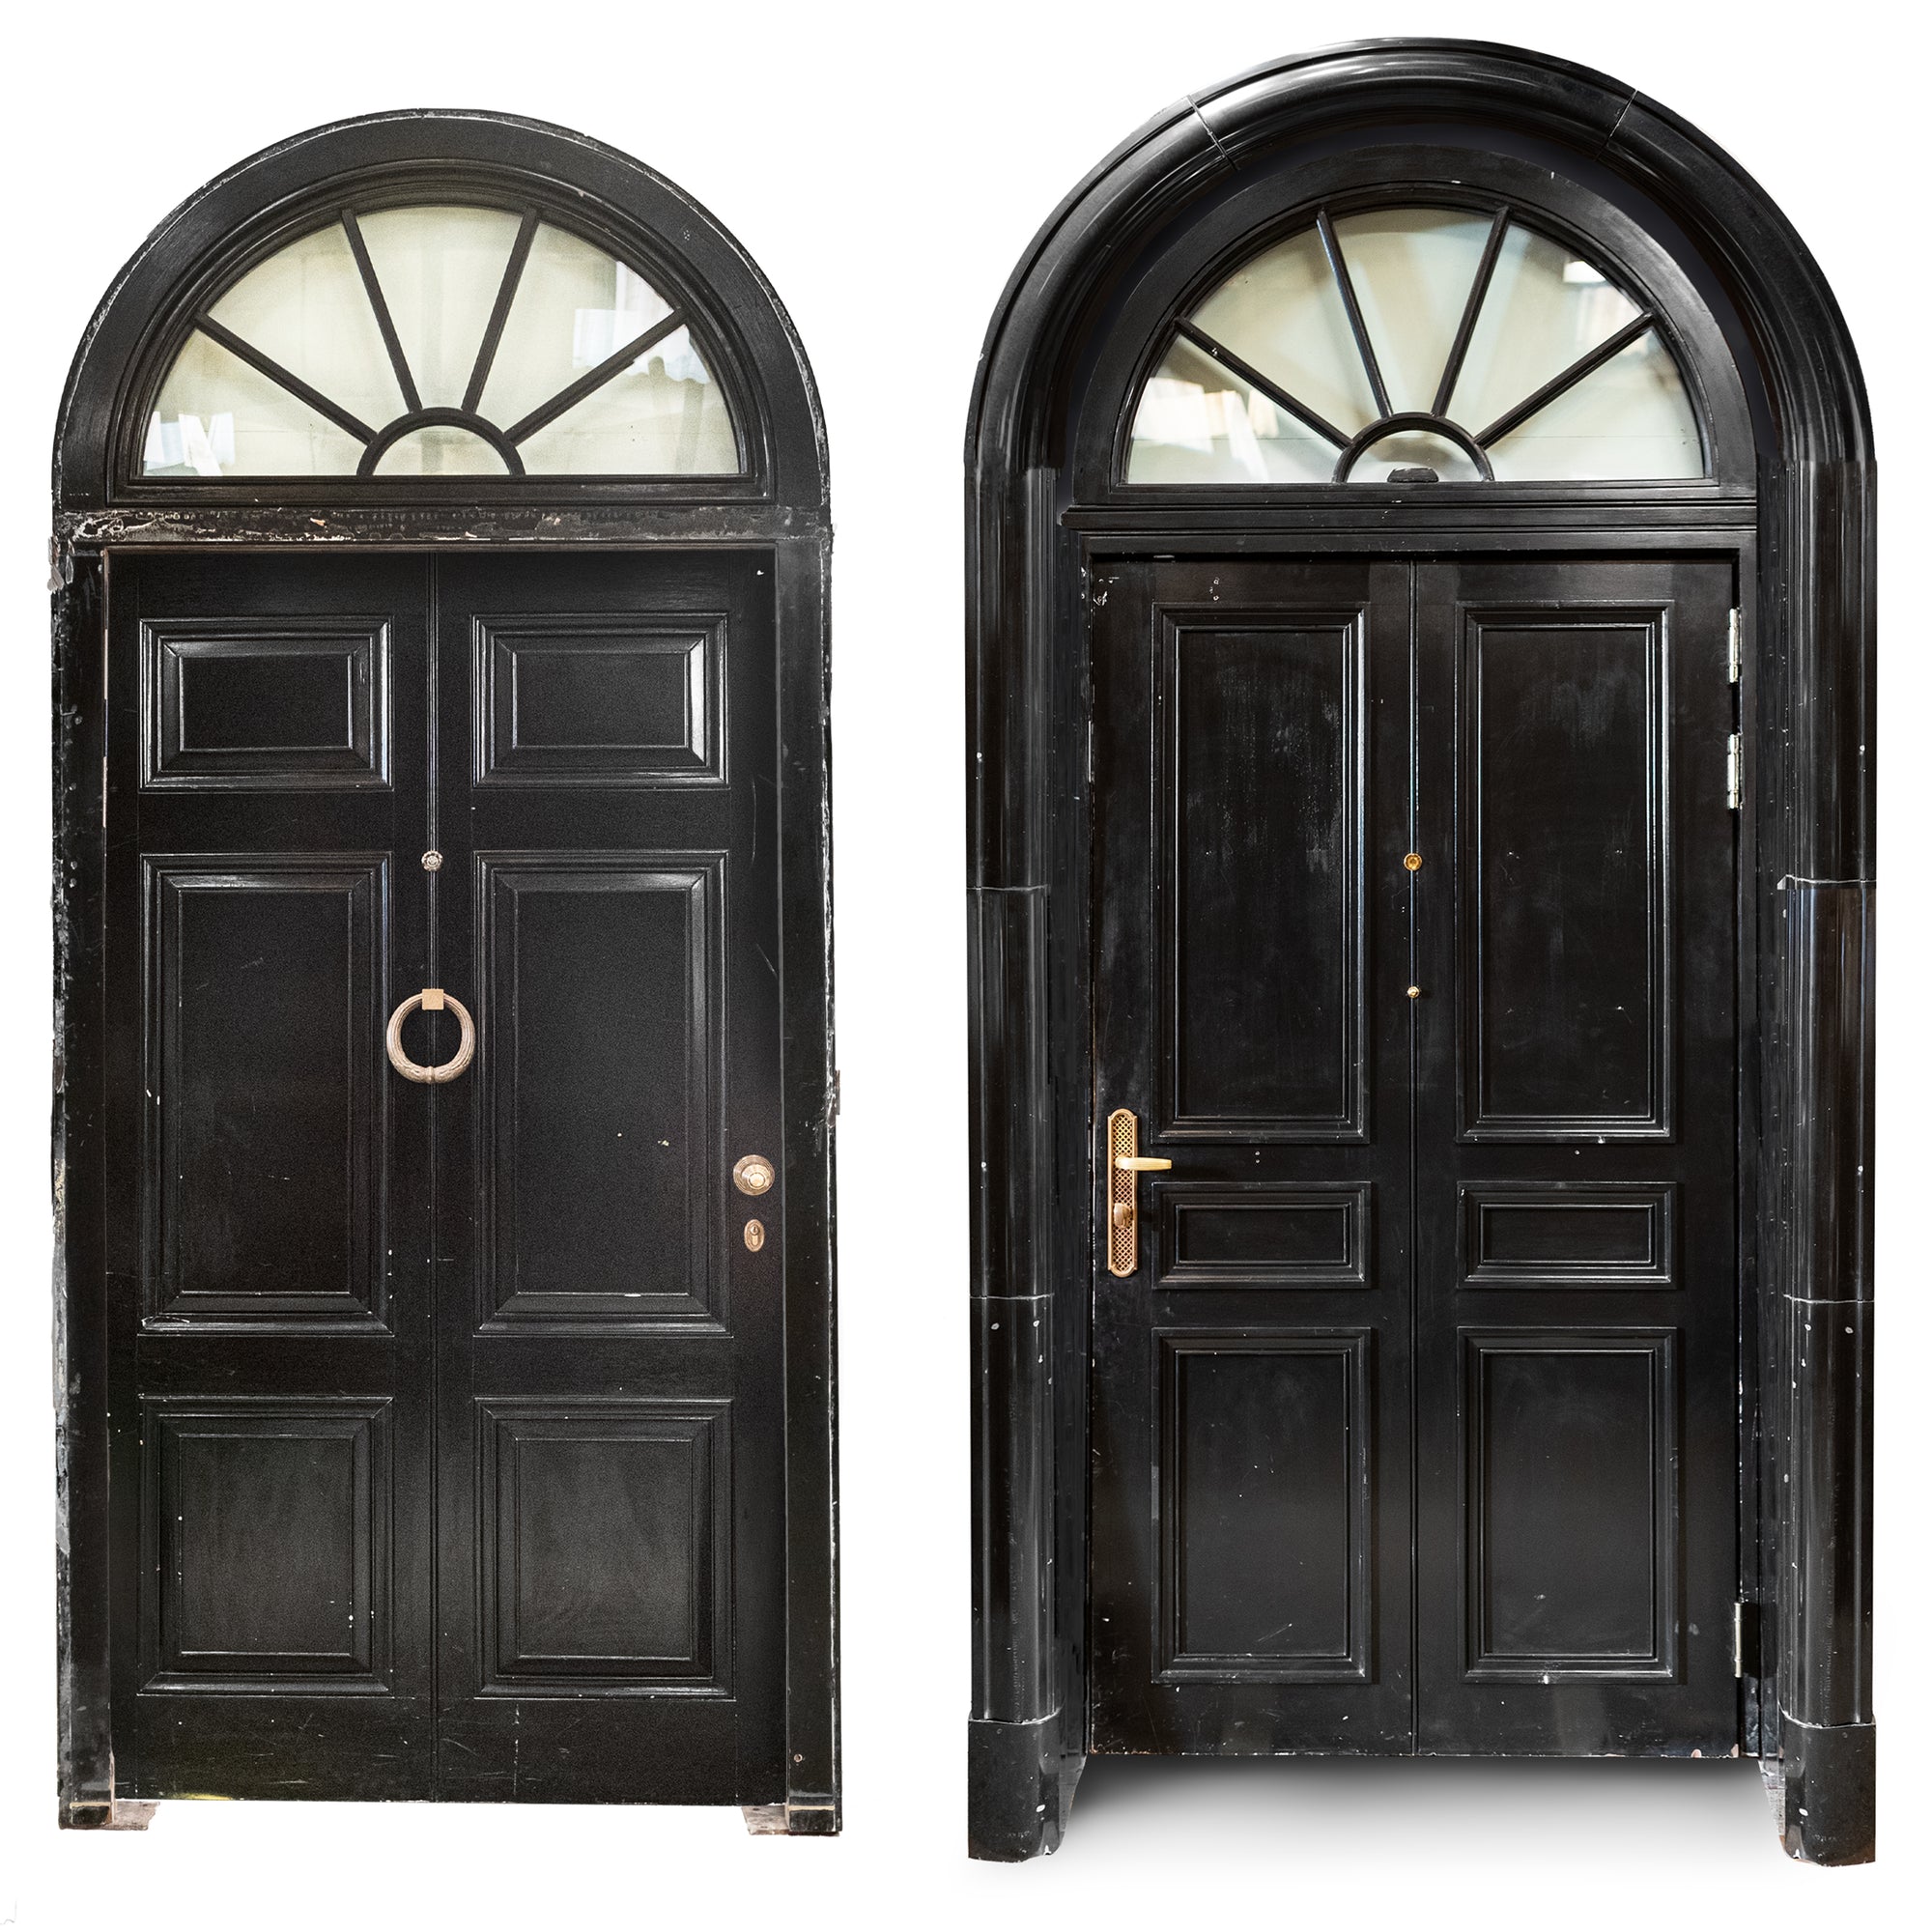 Reclaimed Georgian Style 6 Panel Front Door with Marble Arched Surround & Fan Light | The Architectural Forum